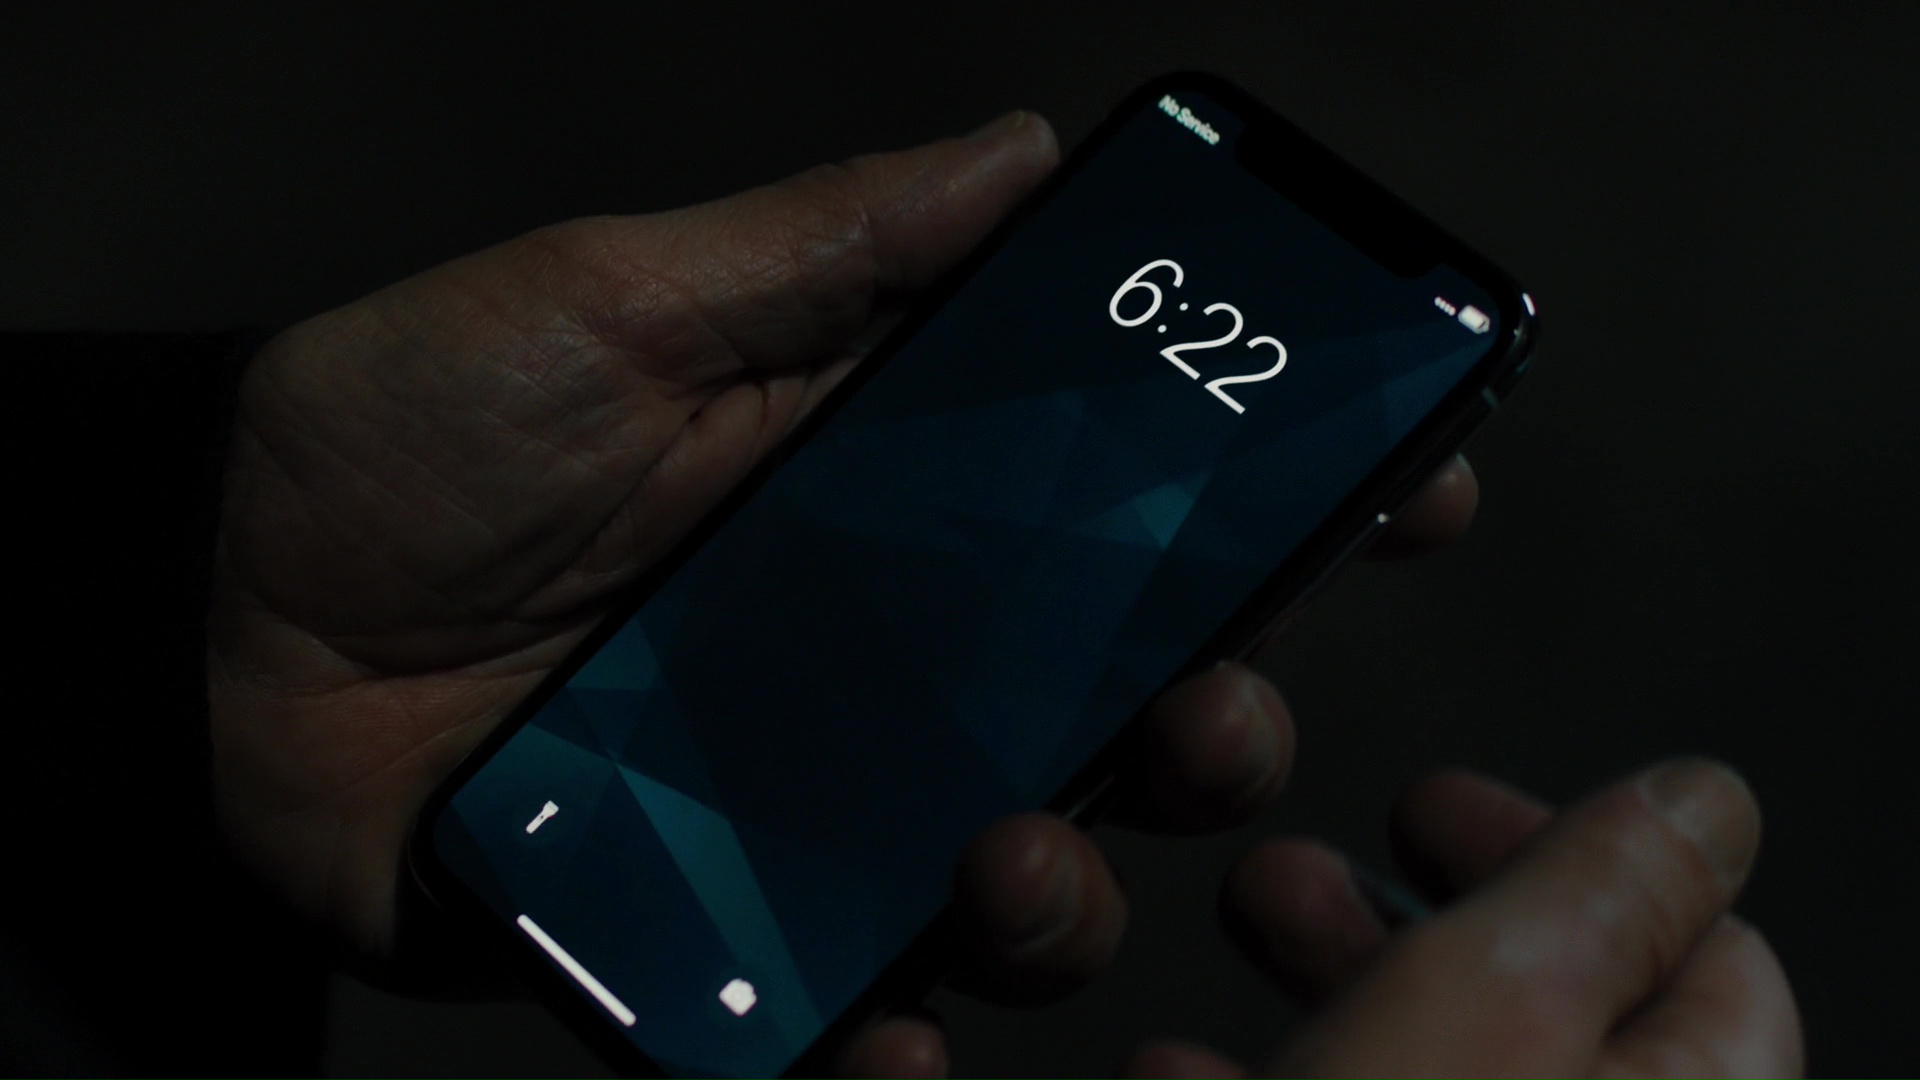 Iphone X Used By Paul Giamatti In Billions - Smartphone , HD Wallpaper & Backgrounds